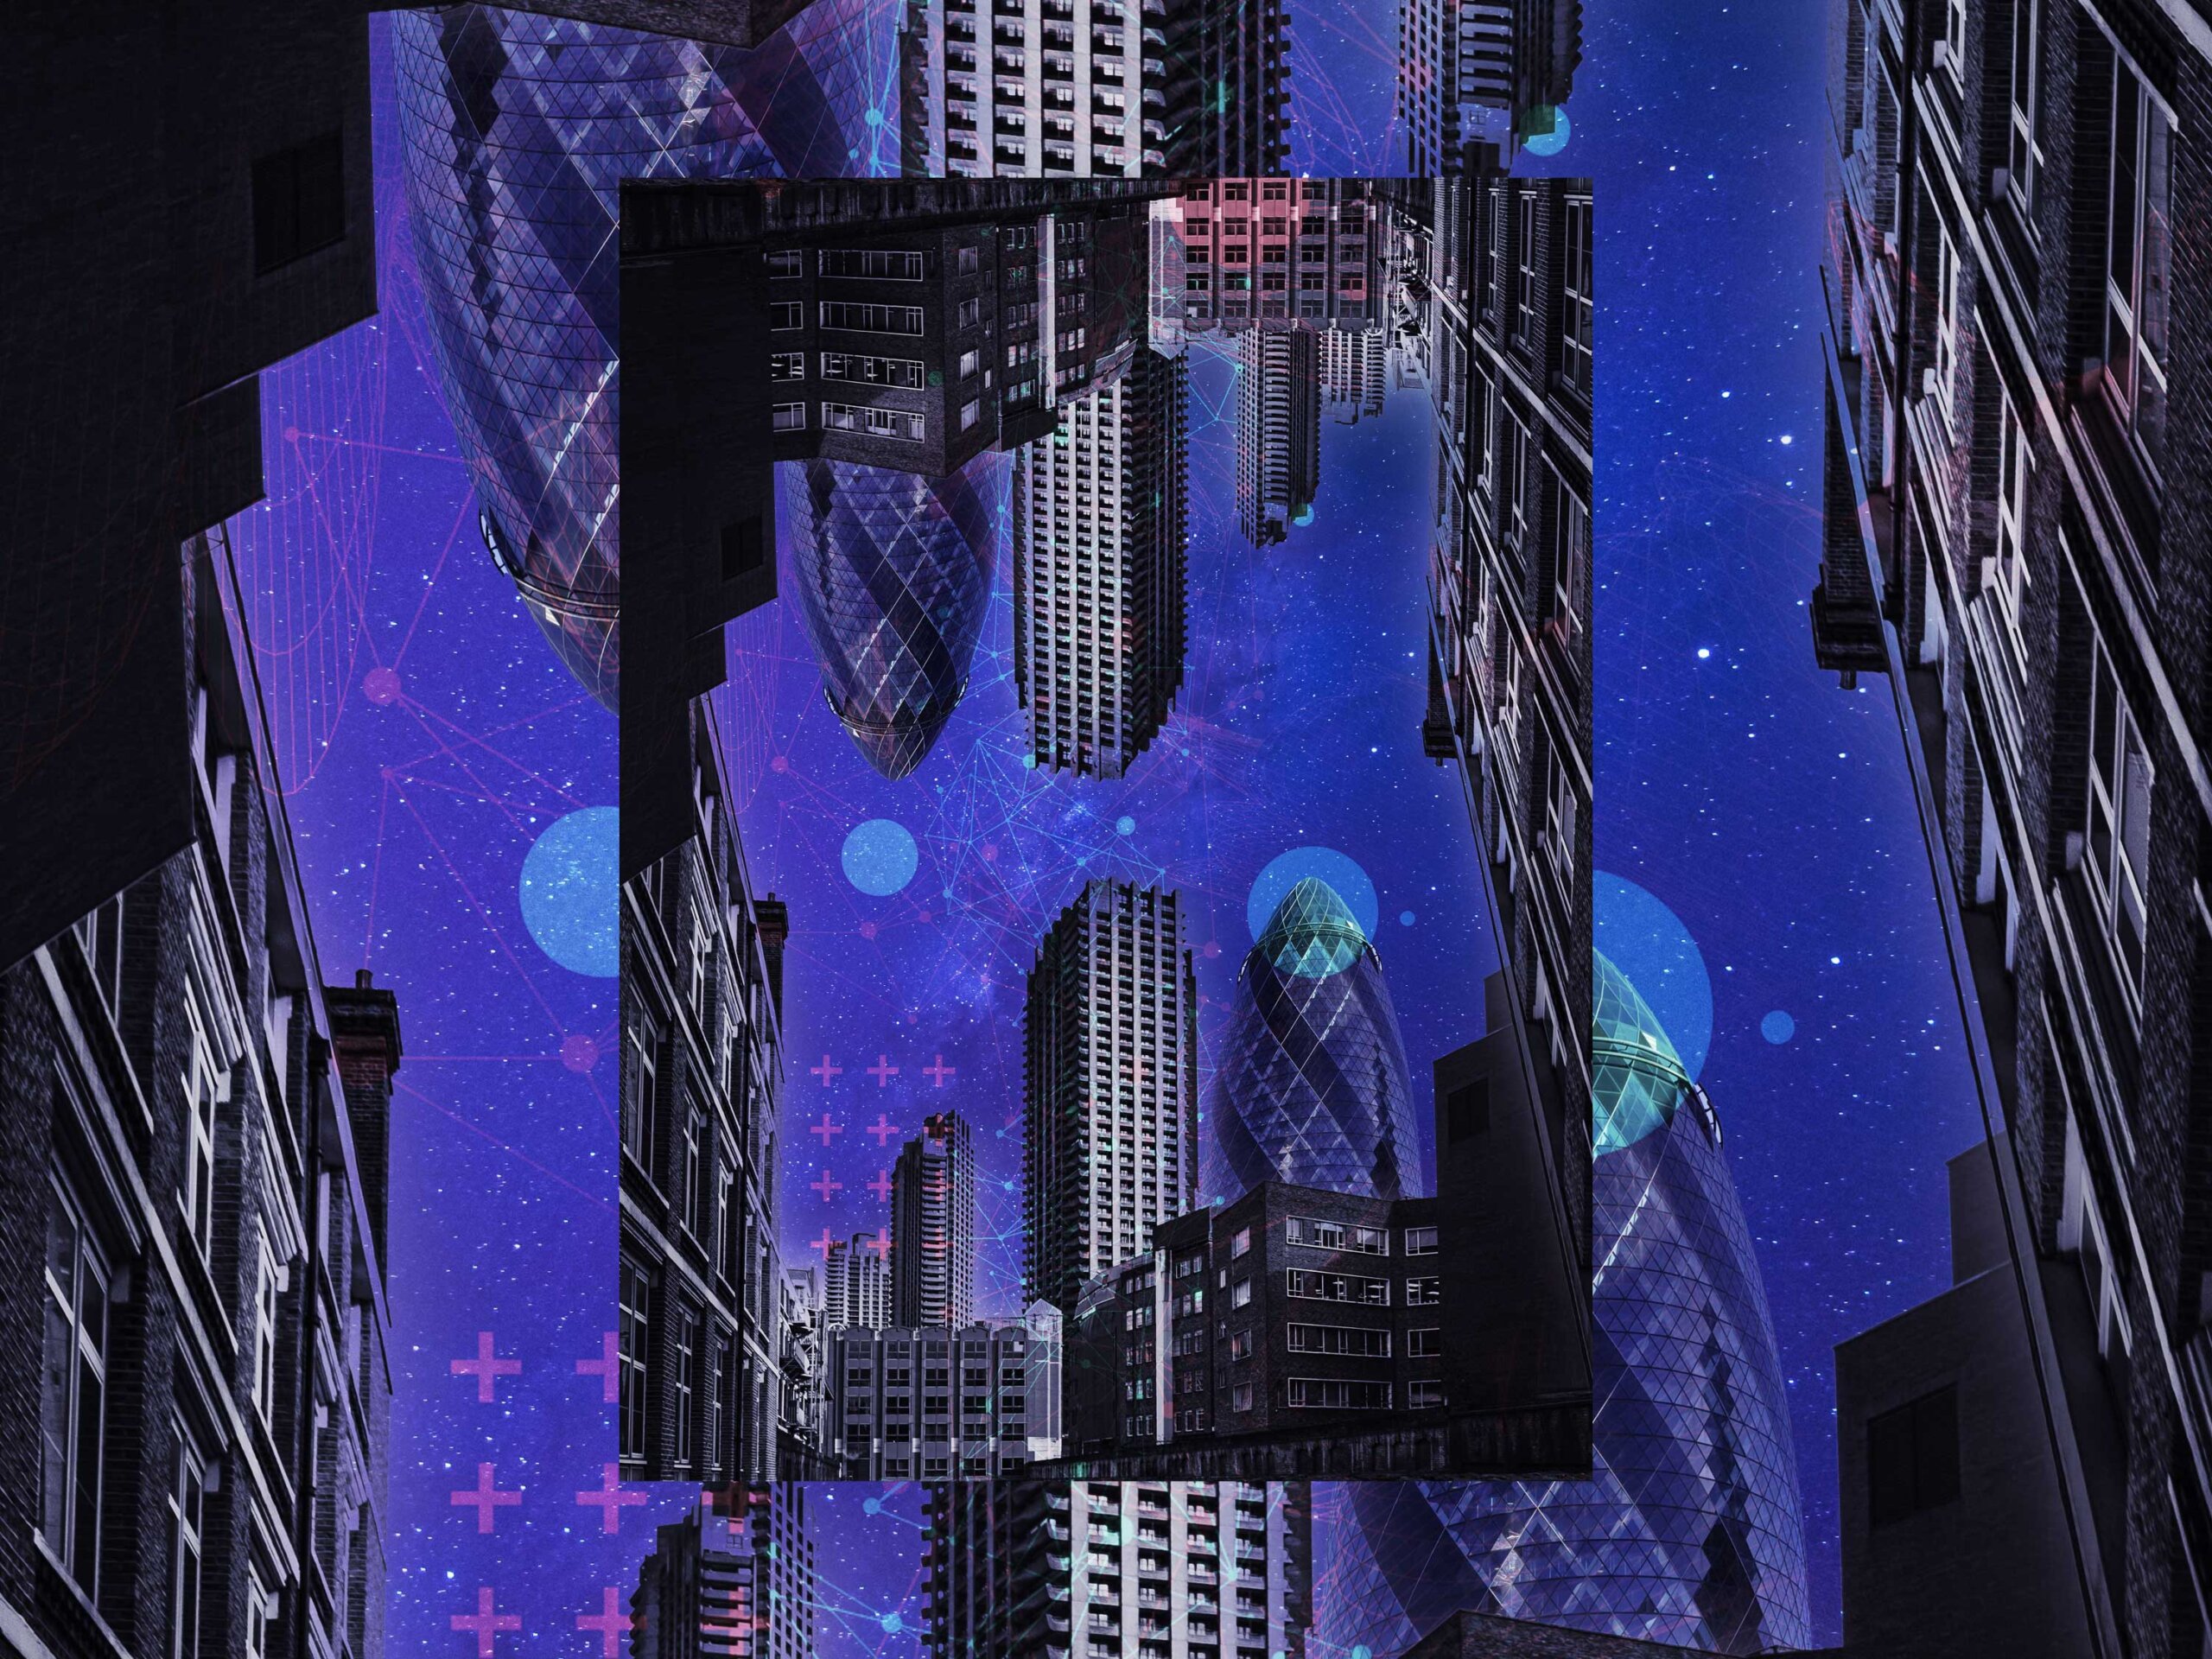 Graphic image of the london skyline, with a mirrored version above, against a space-like background